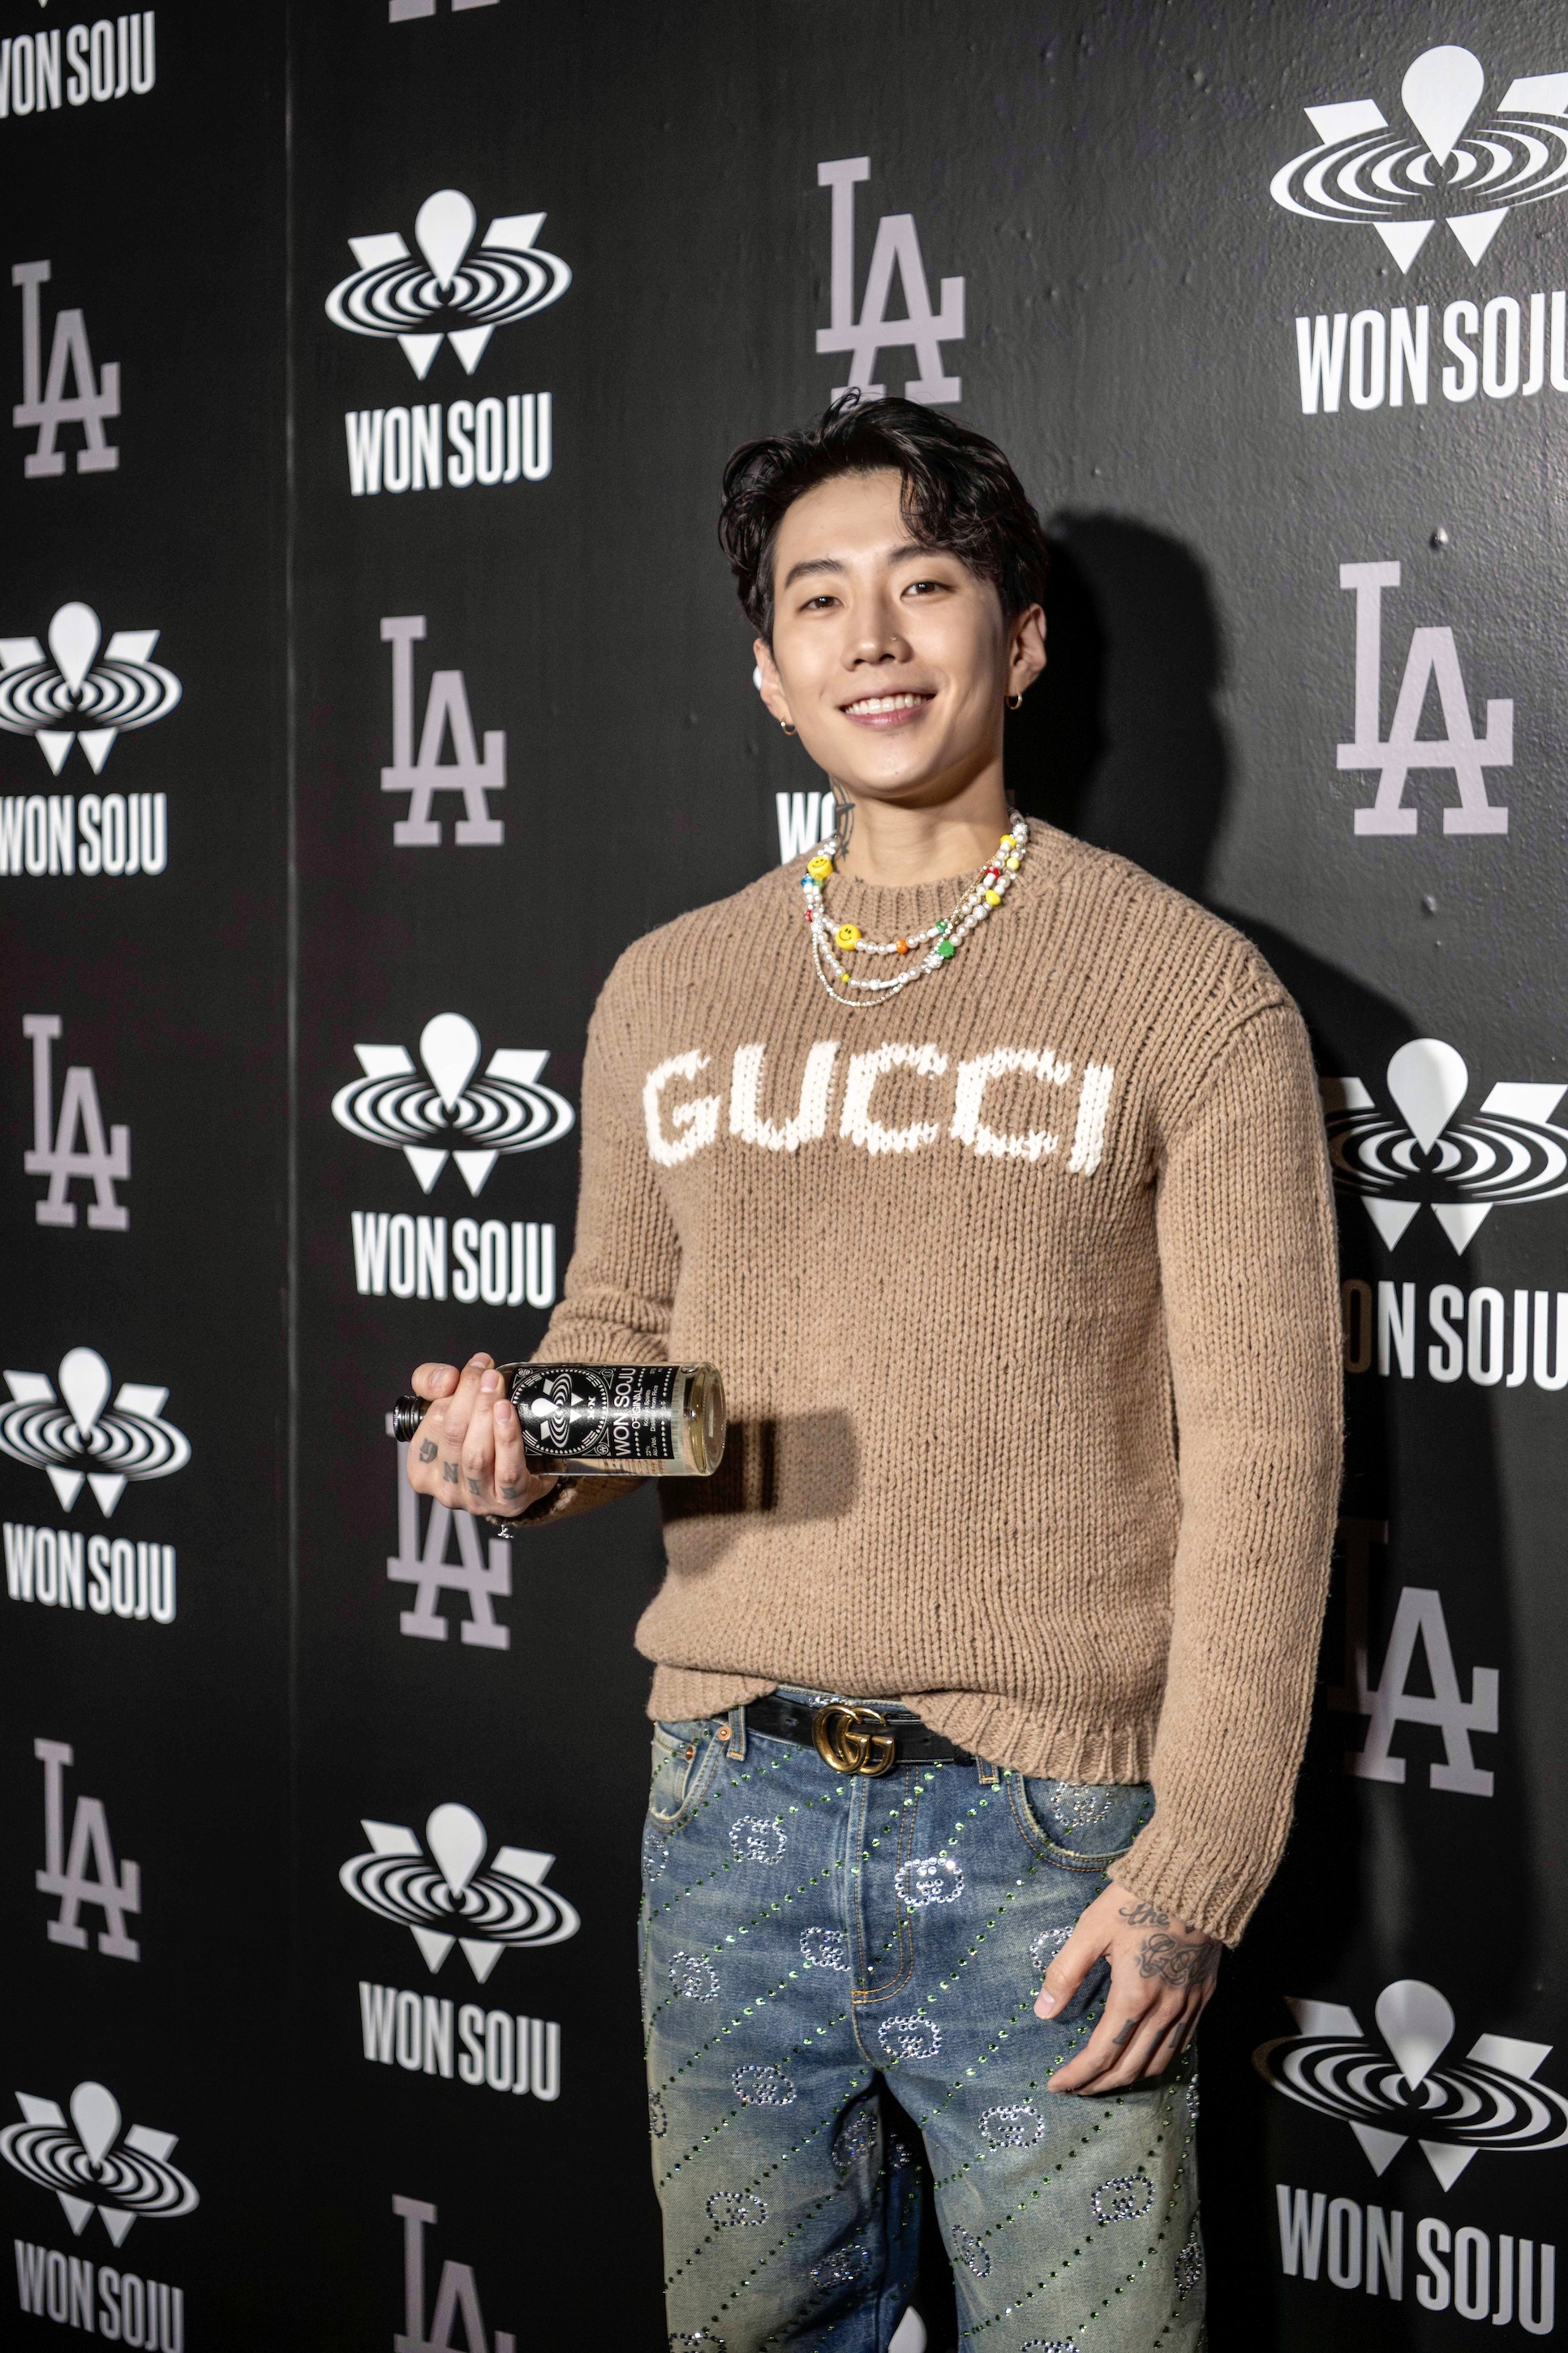 Gallery: International superstar Jay Park launches WON SOJU in the US -  Daily Bruin